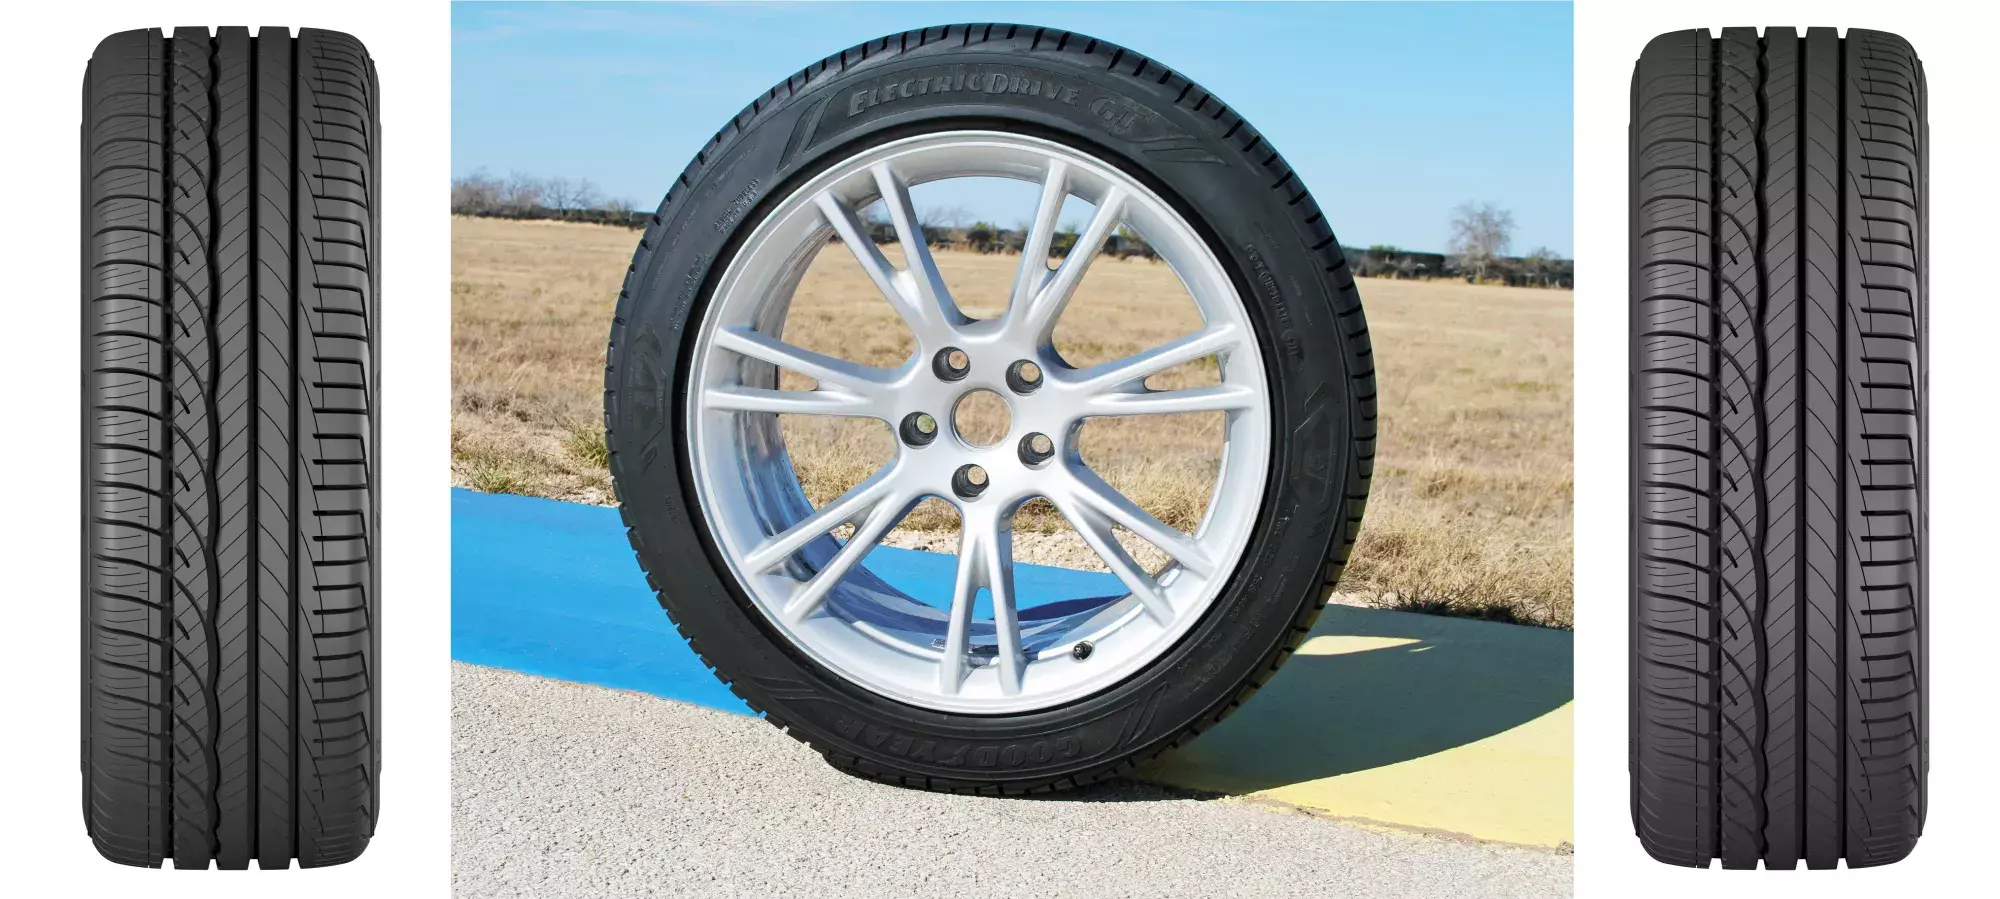 Goodyear introduces a new tyre designed specifically for Tesla and other EVs